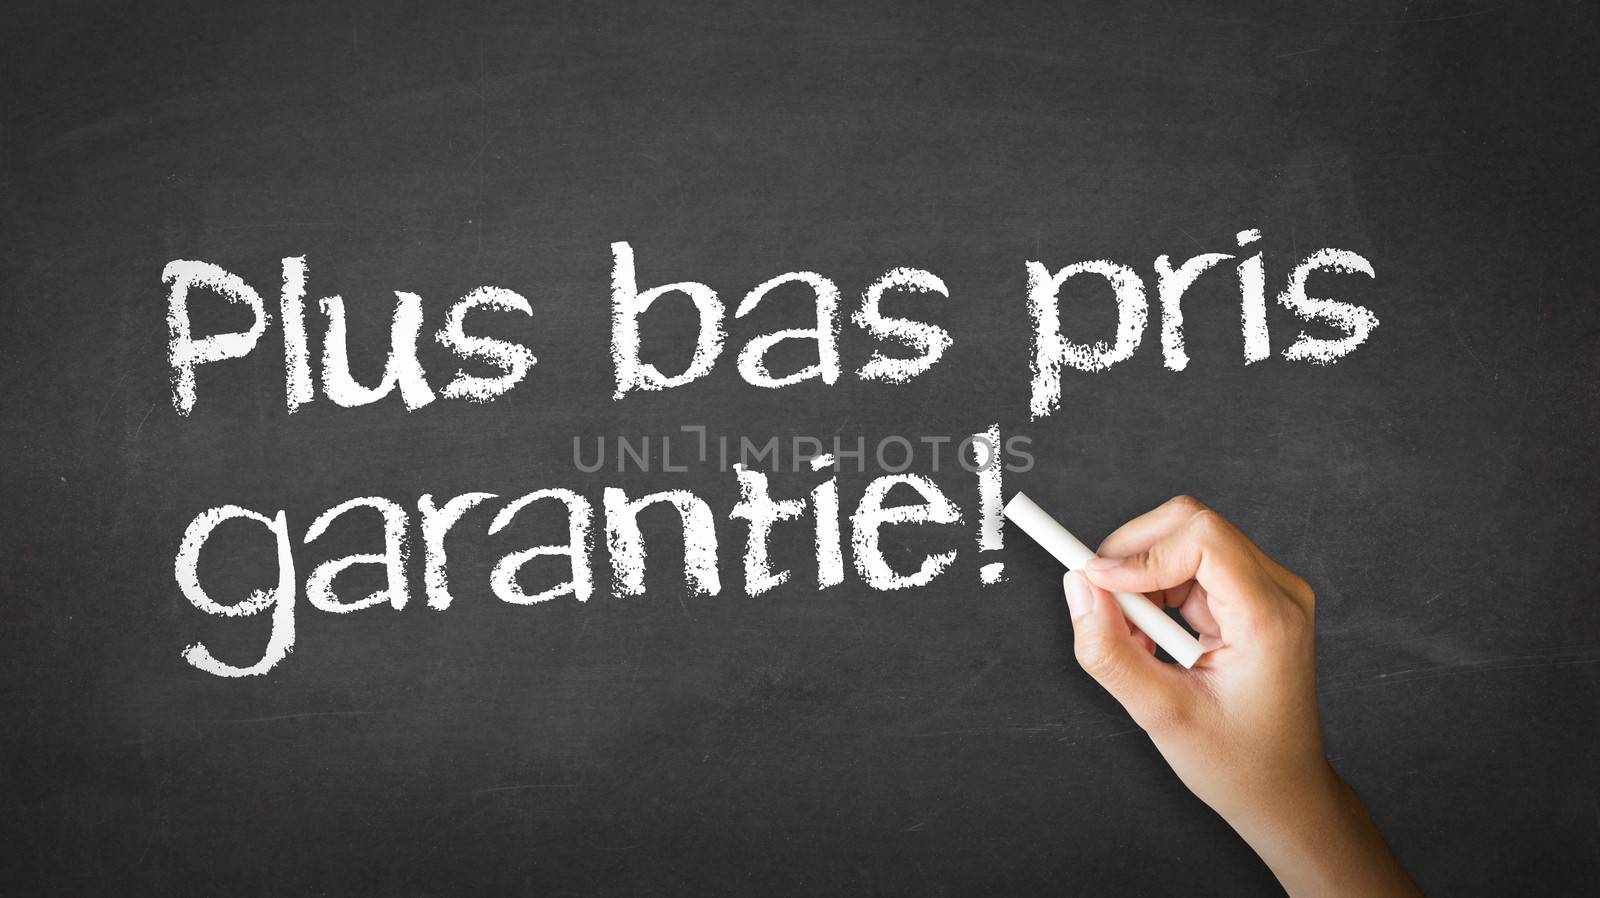 Lowest Price Guarantee (In French) by kbuntu